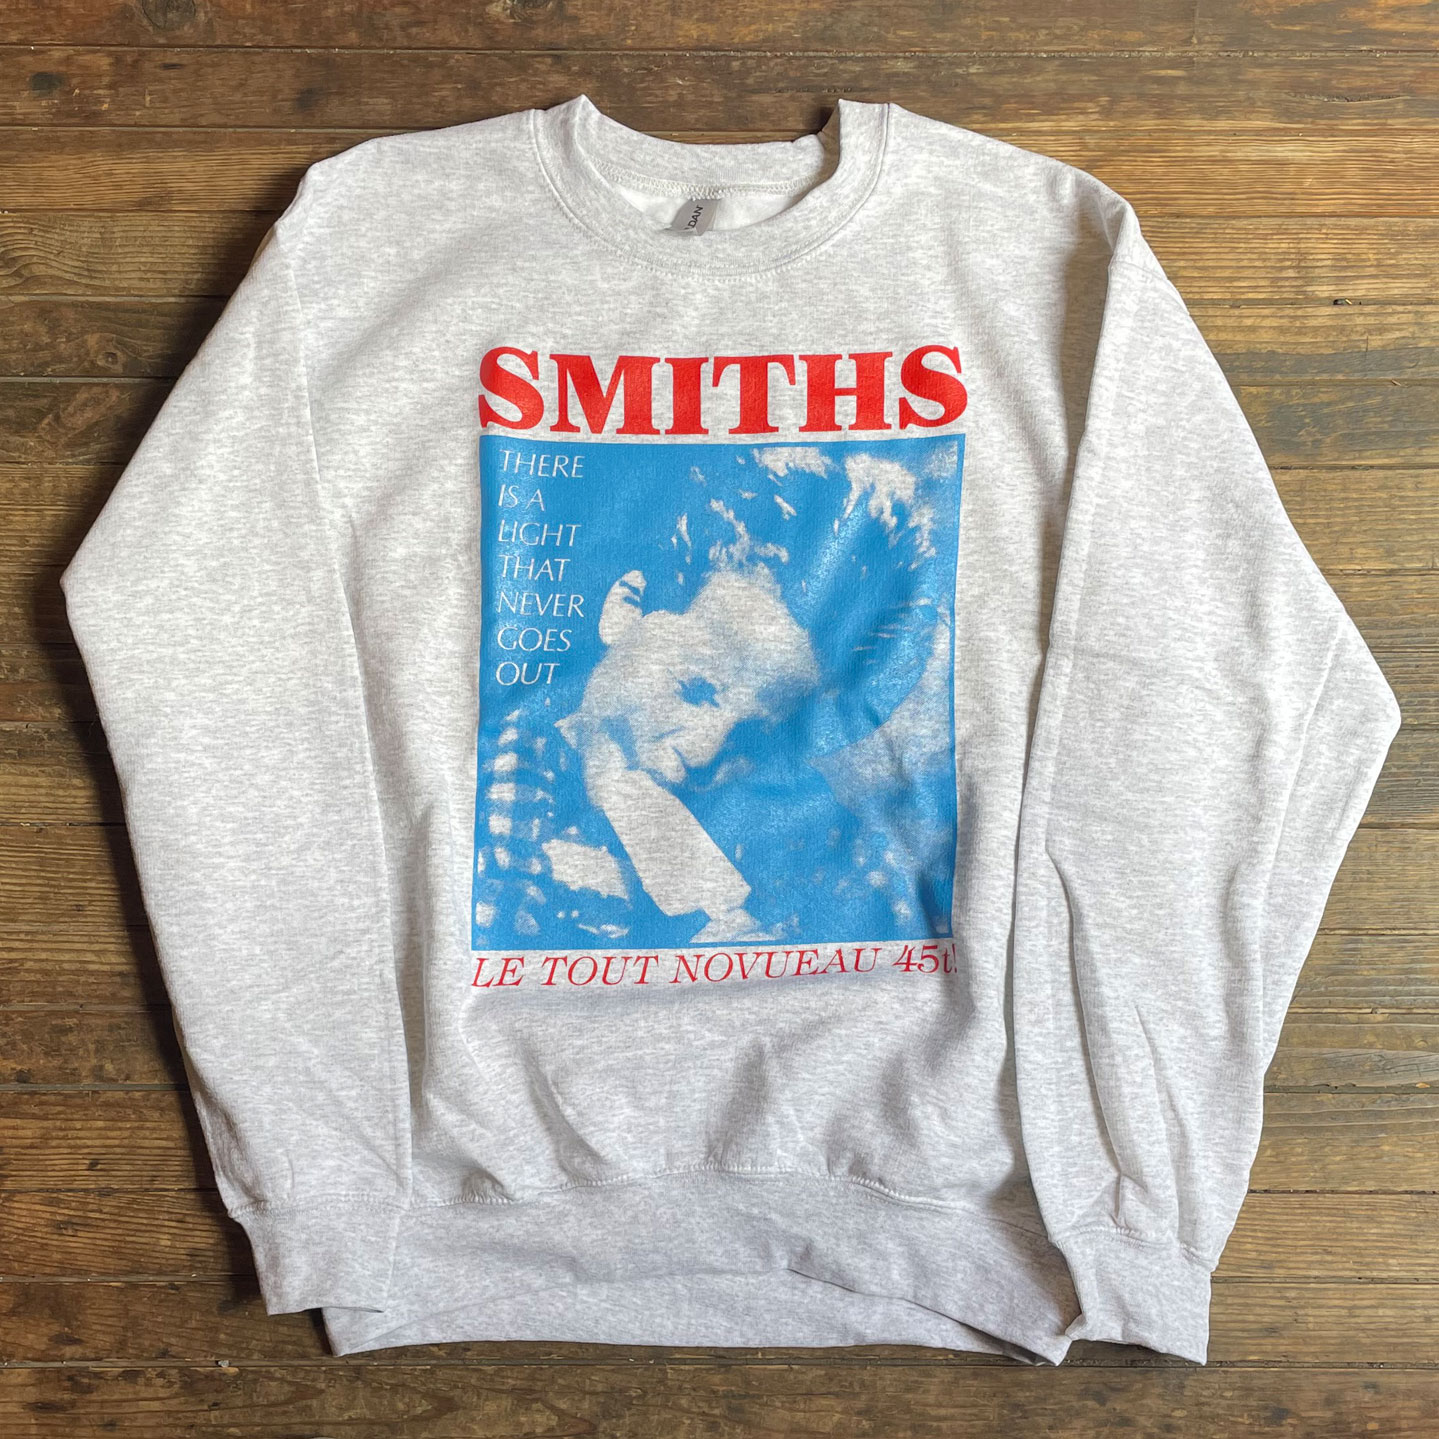 The Smiths スウェット ヴィンテージ